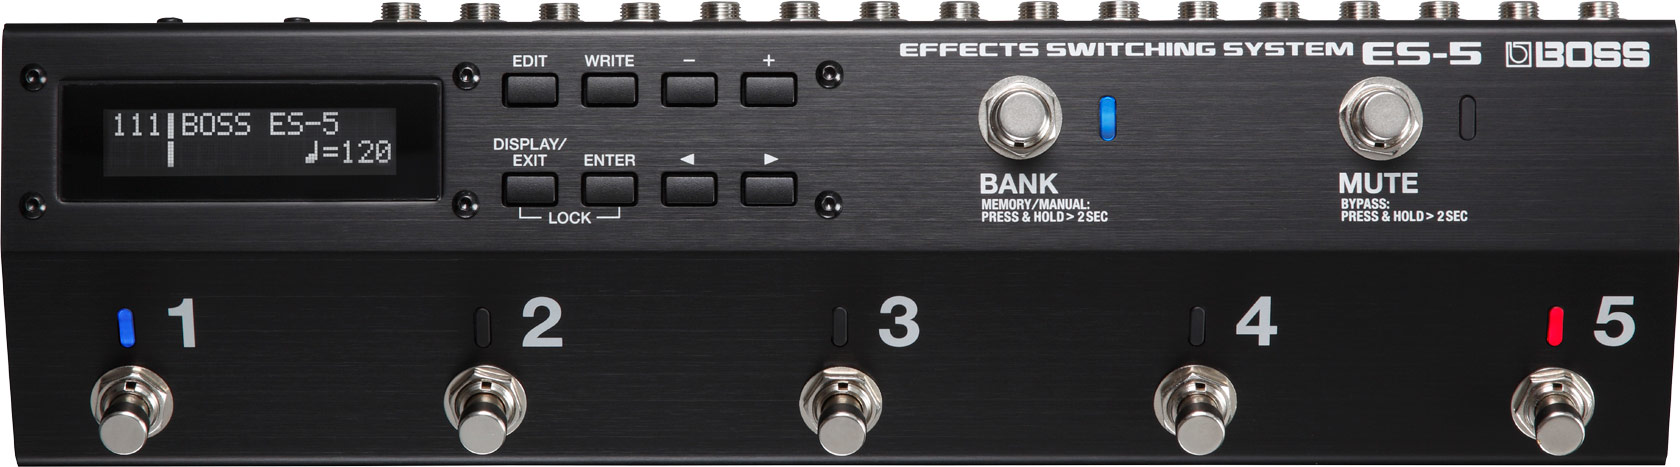 BOSS - ES-5 | Effects Switching System